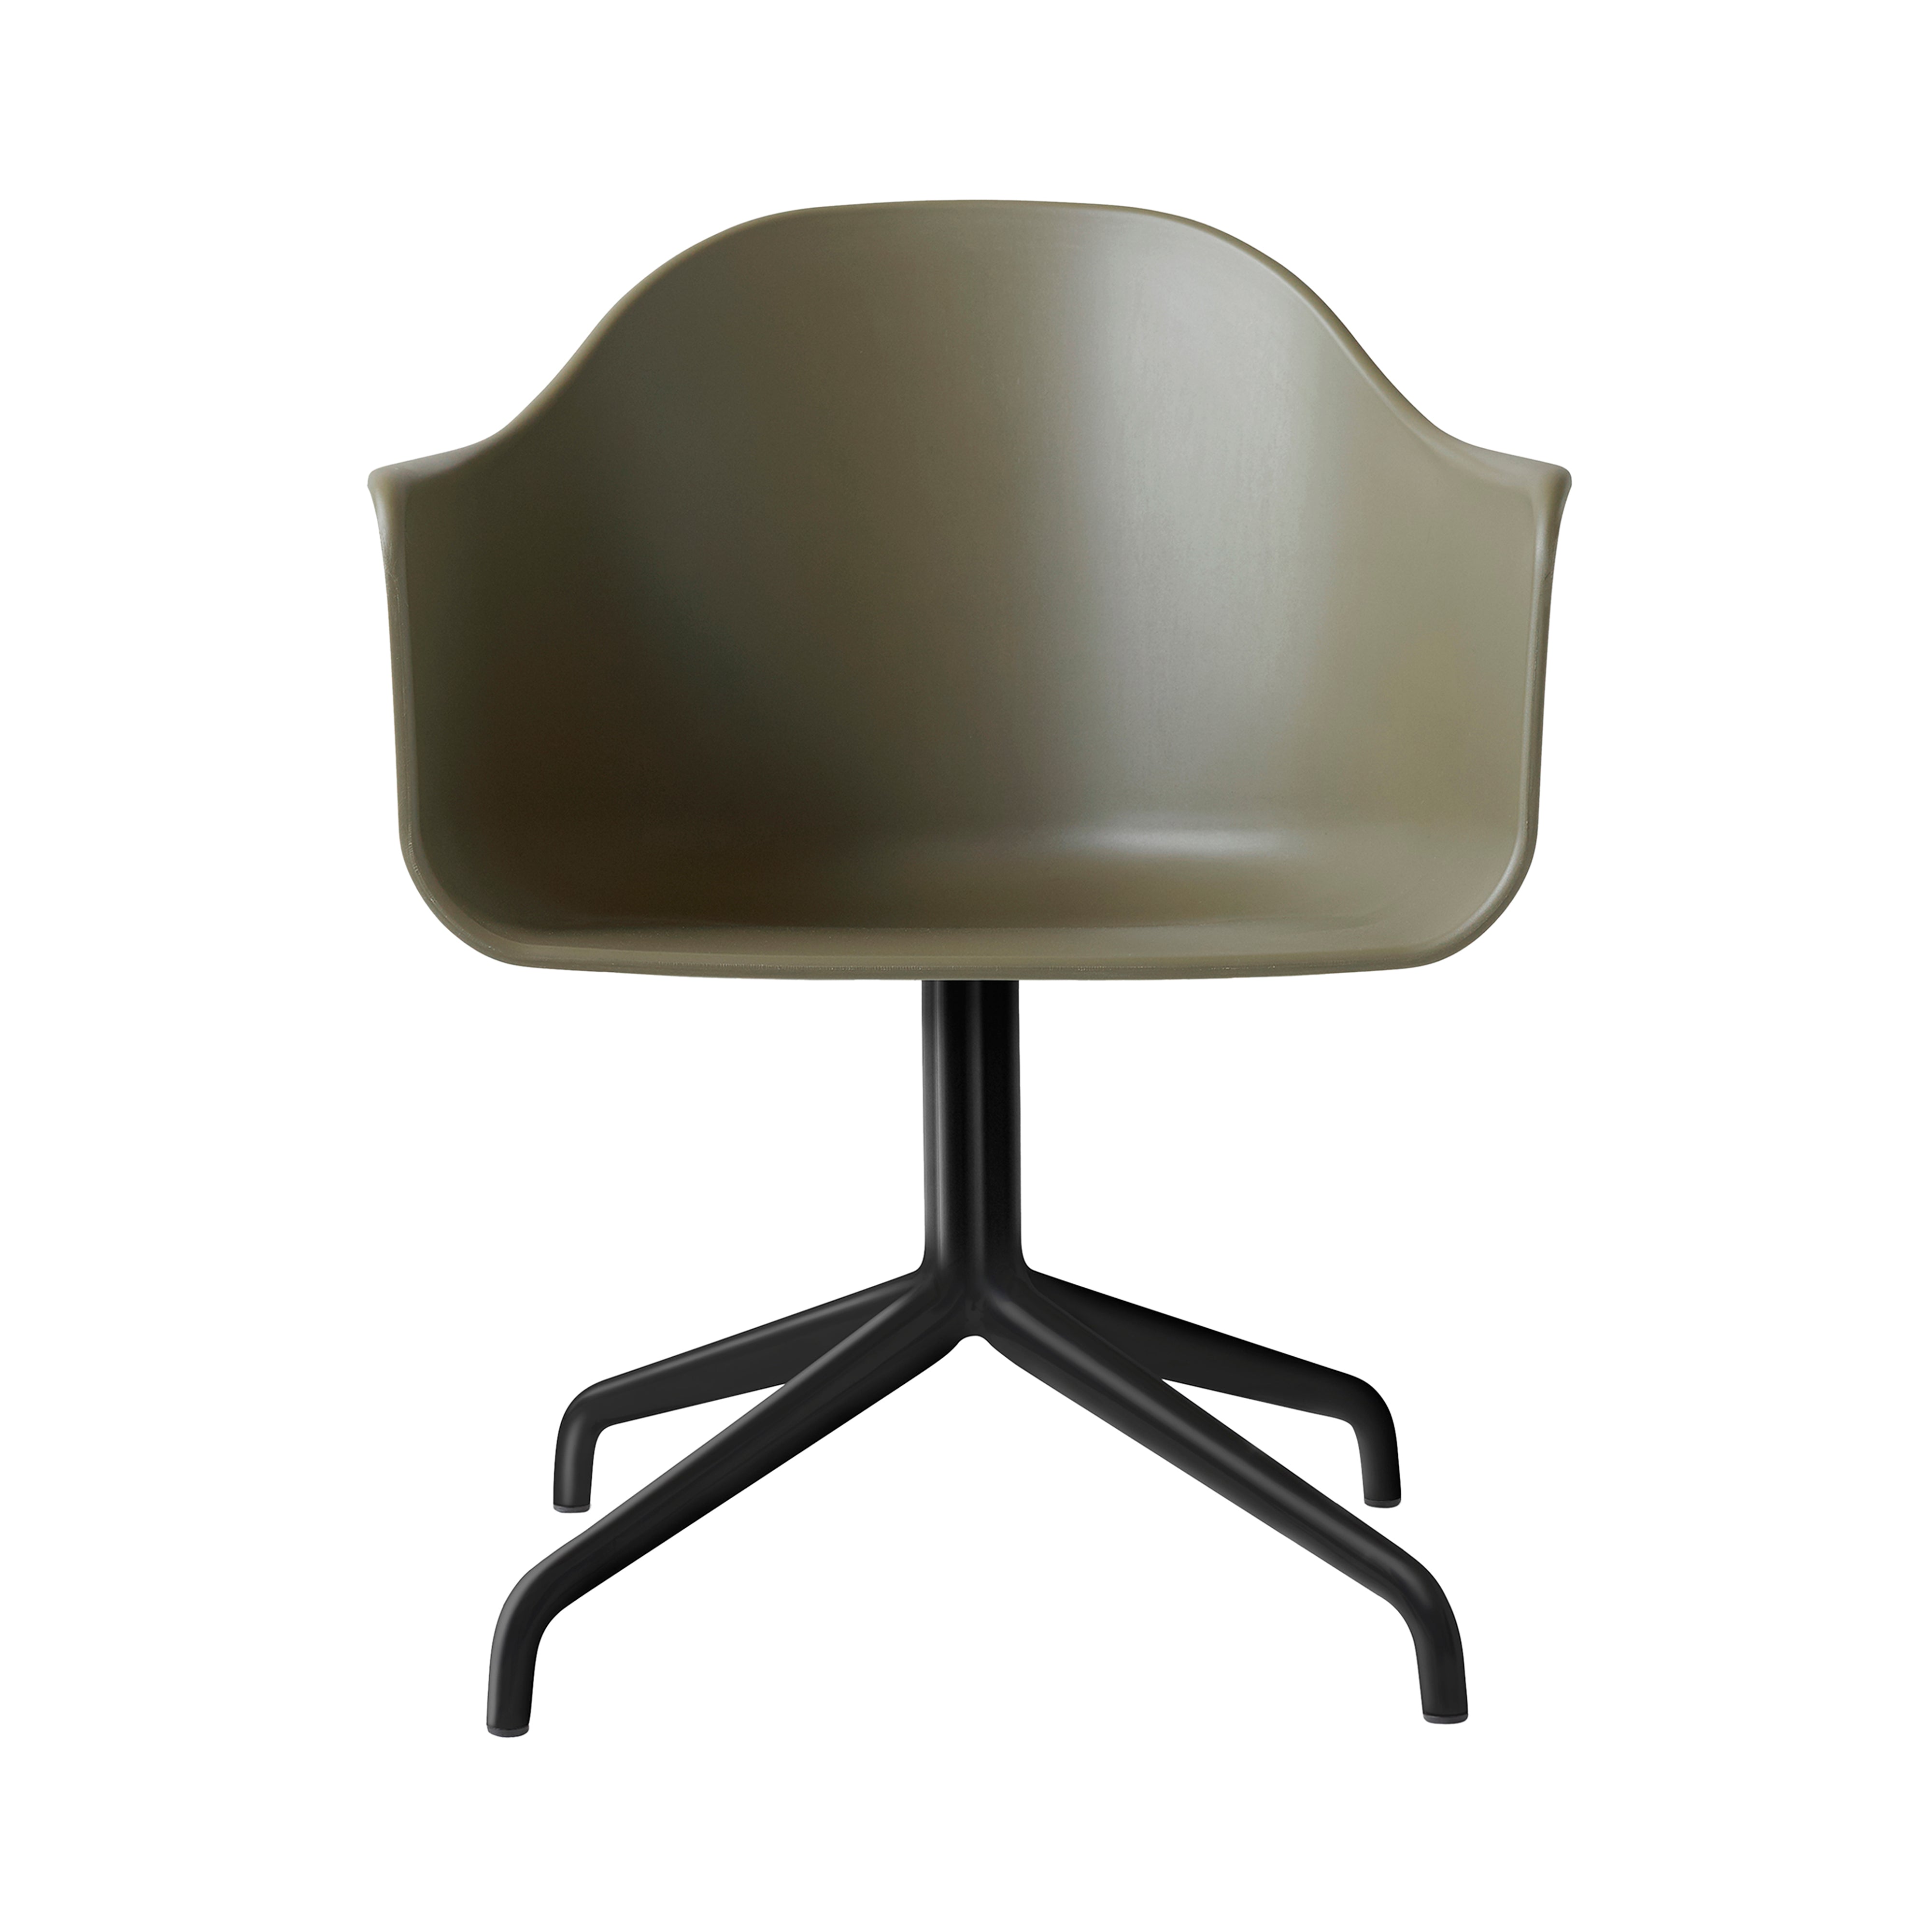 Harbour Dining Chair: Star Base + Black Steel + Olive